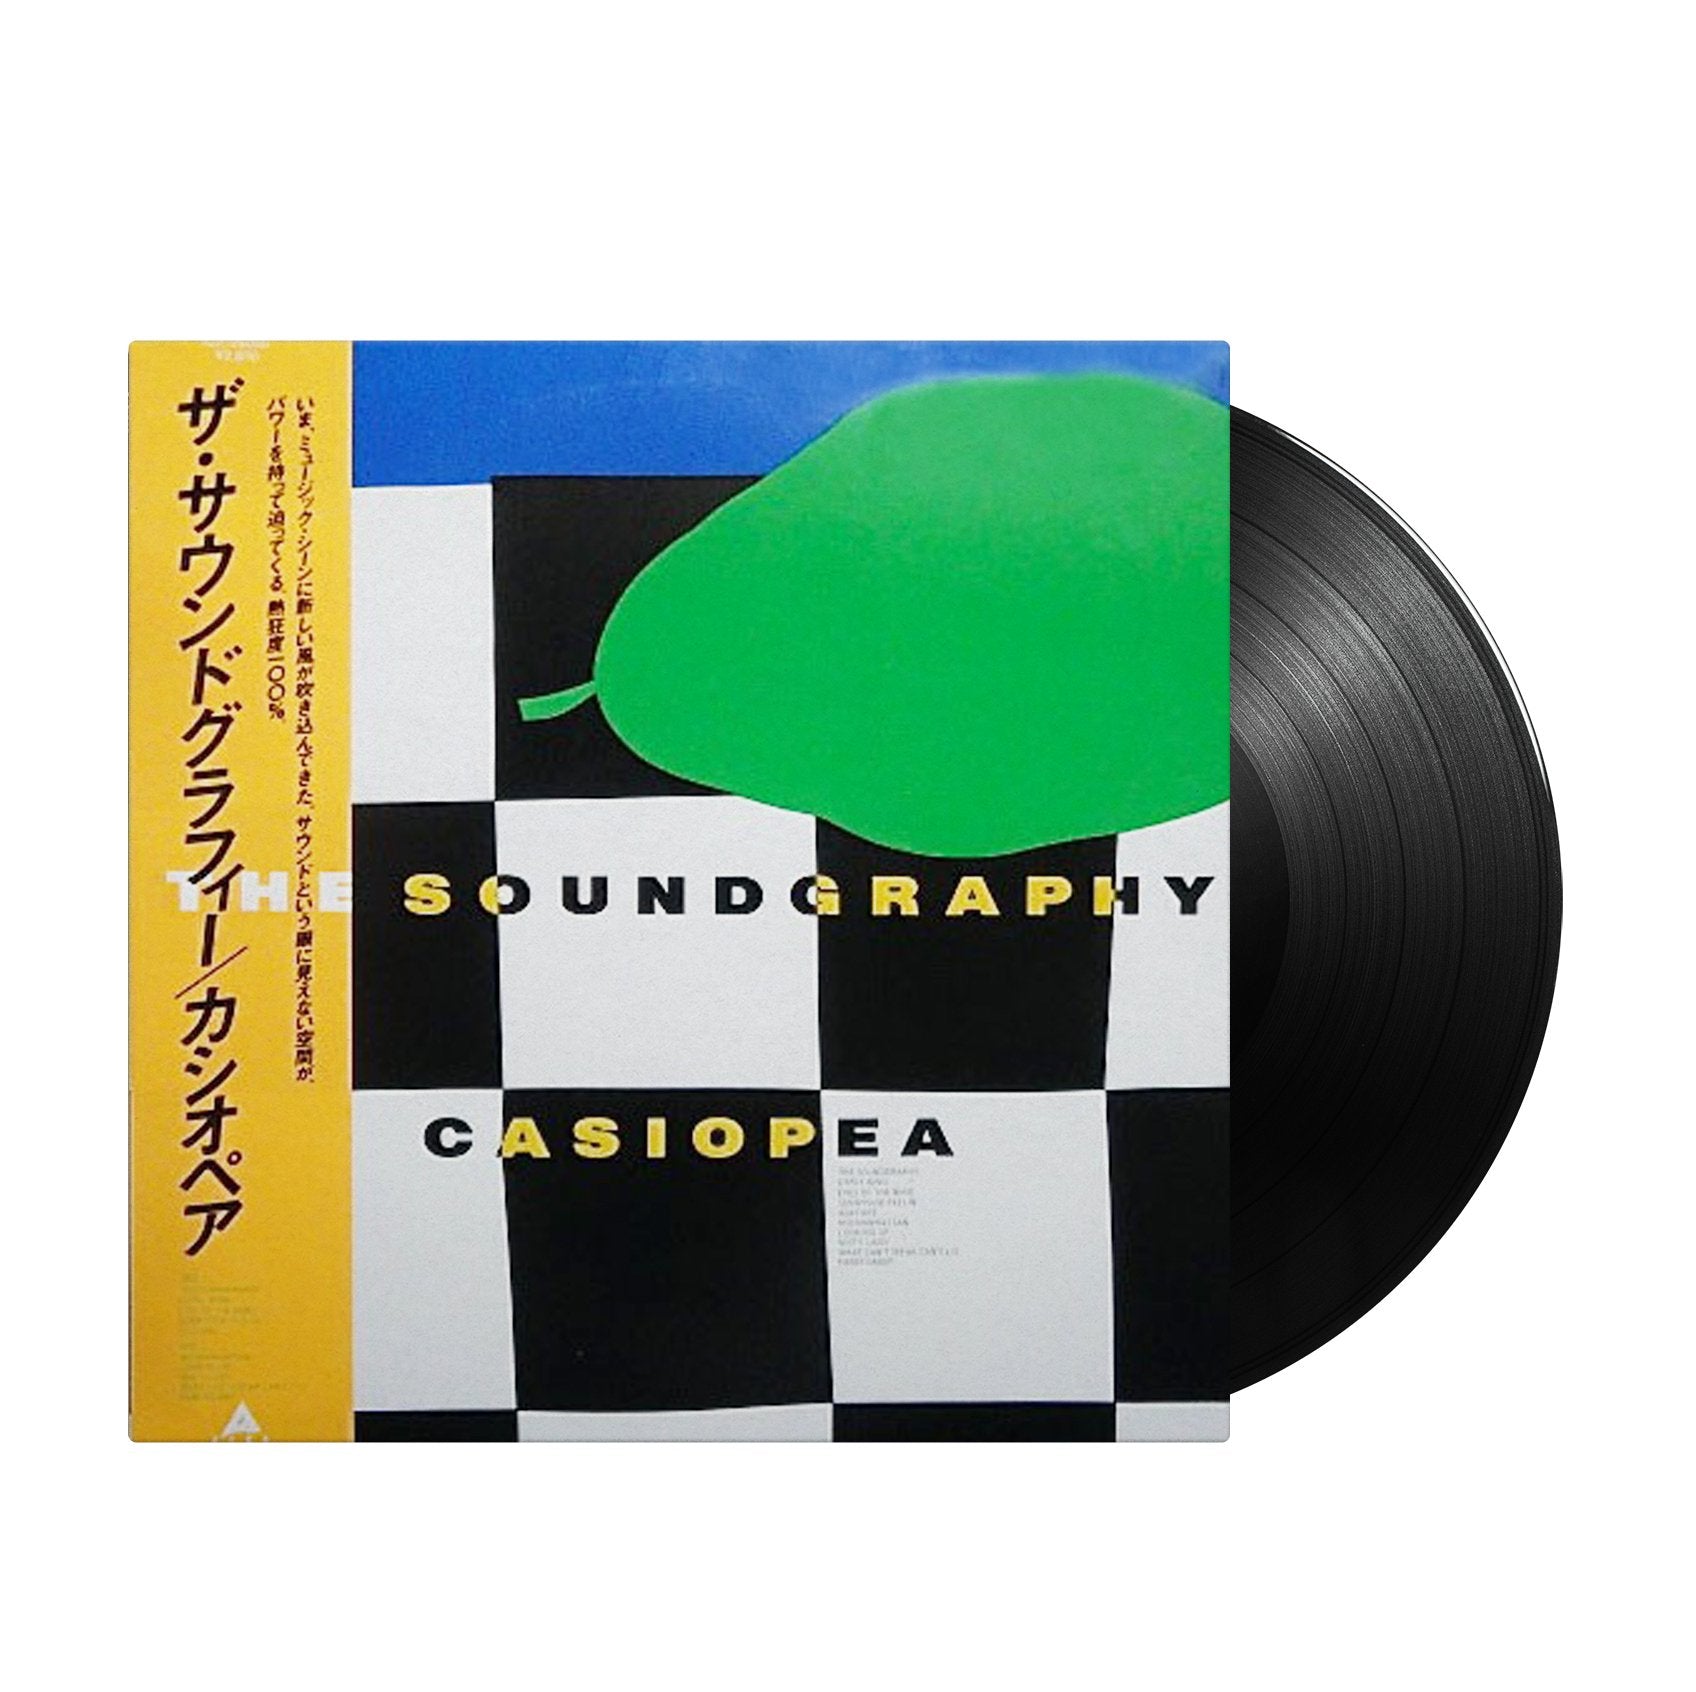 Casiopea - The Soundgraphy (Japan Import) - Inner Ocean Records